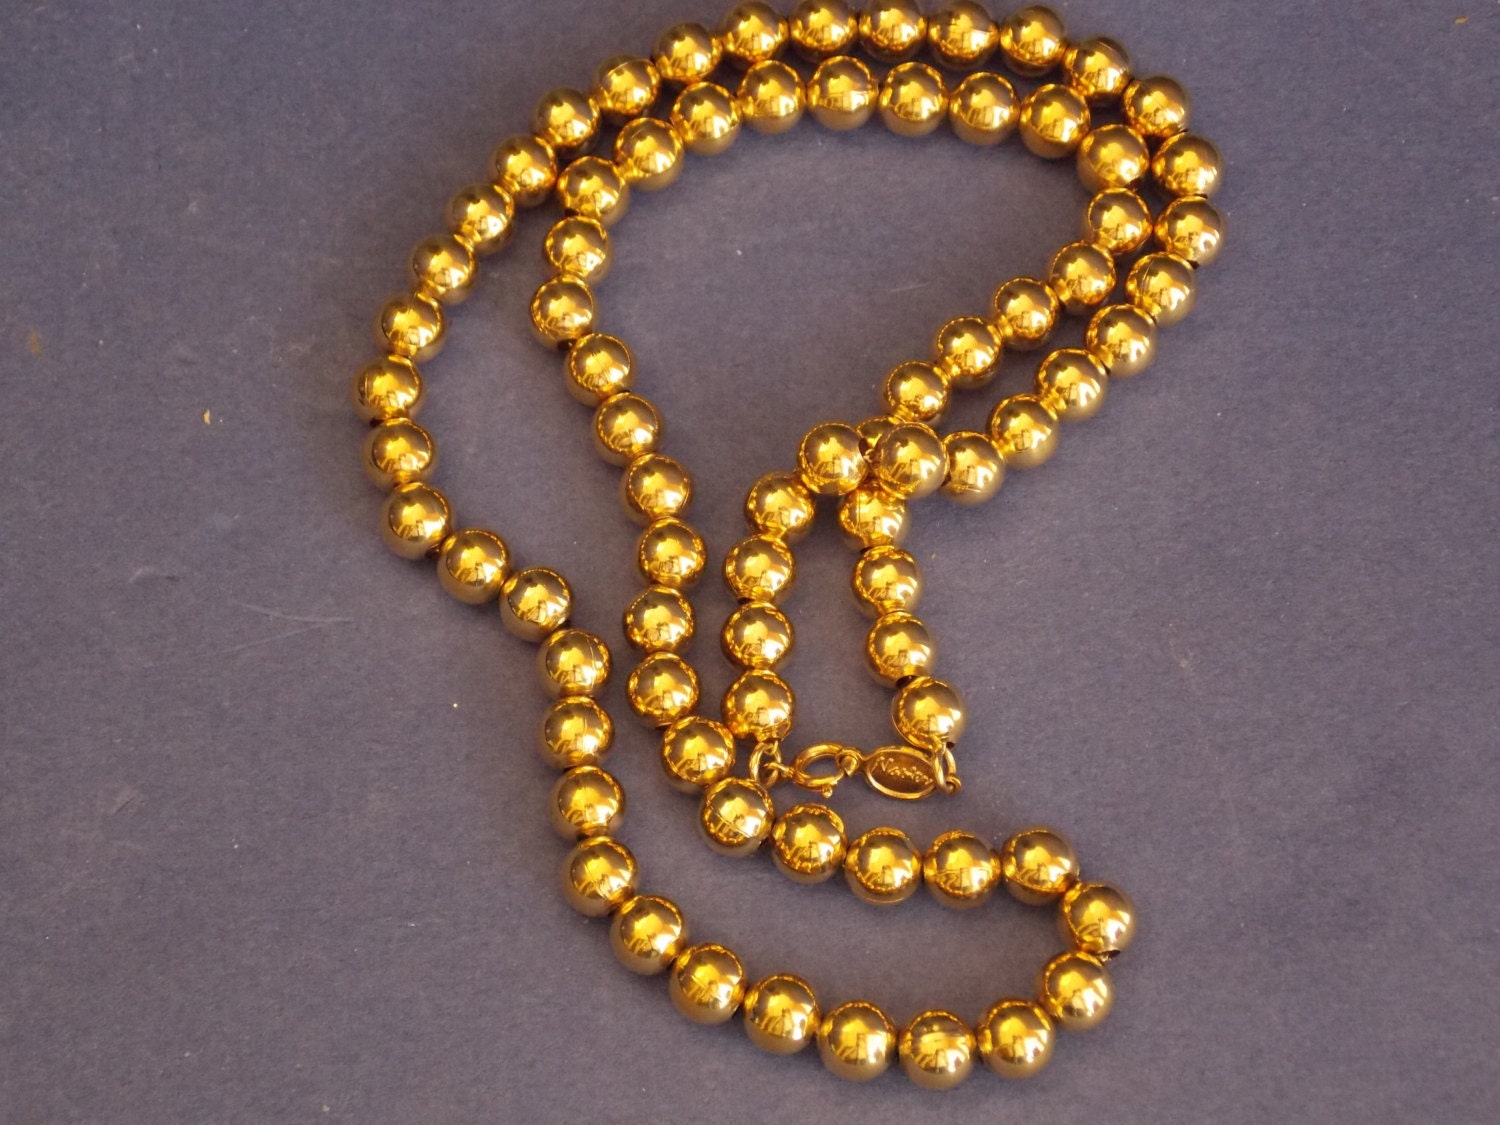 Vintage Napier Goldtone Beaded Necklace by lizvalentinedesigns